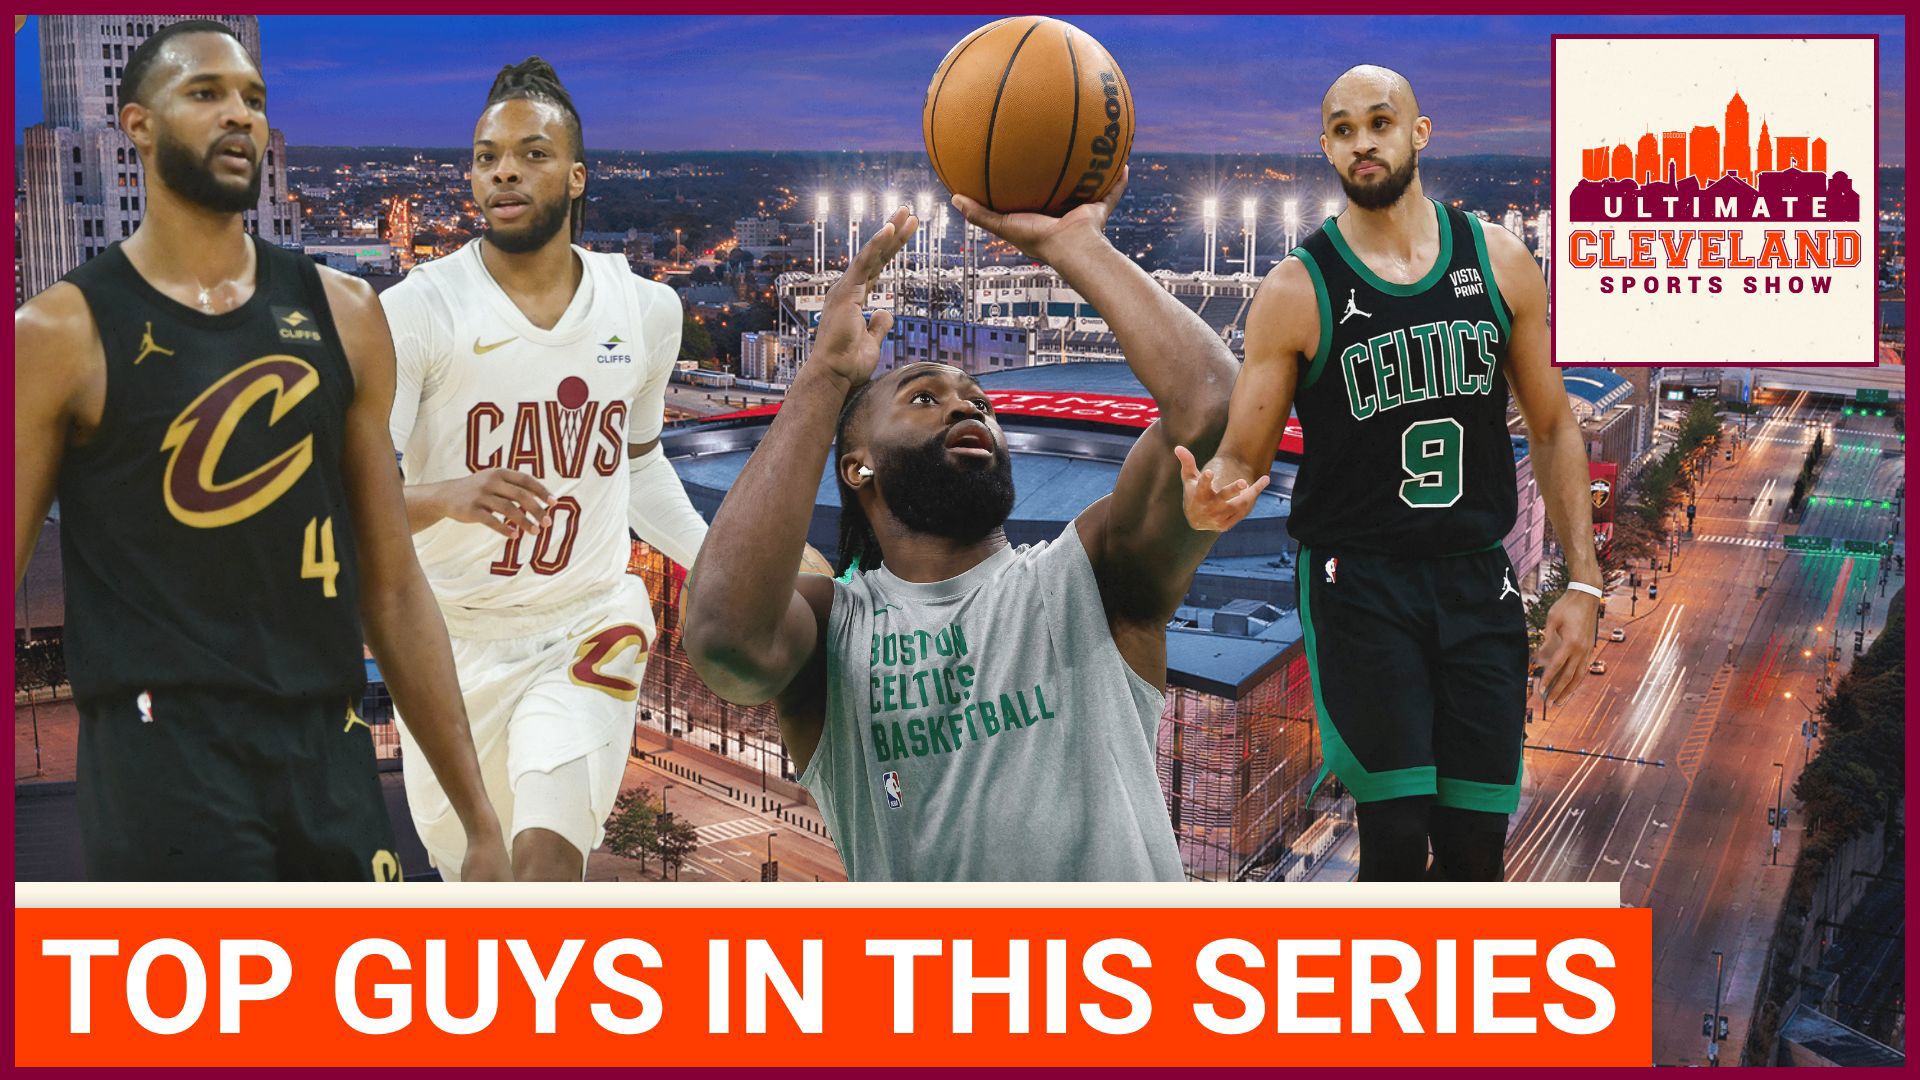 Who will be the top ten players in the Cavs vs. Celtics series? UCSS has the conversation